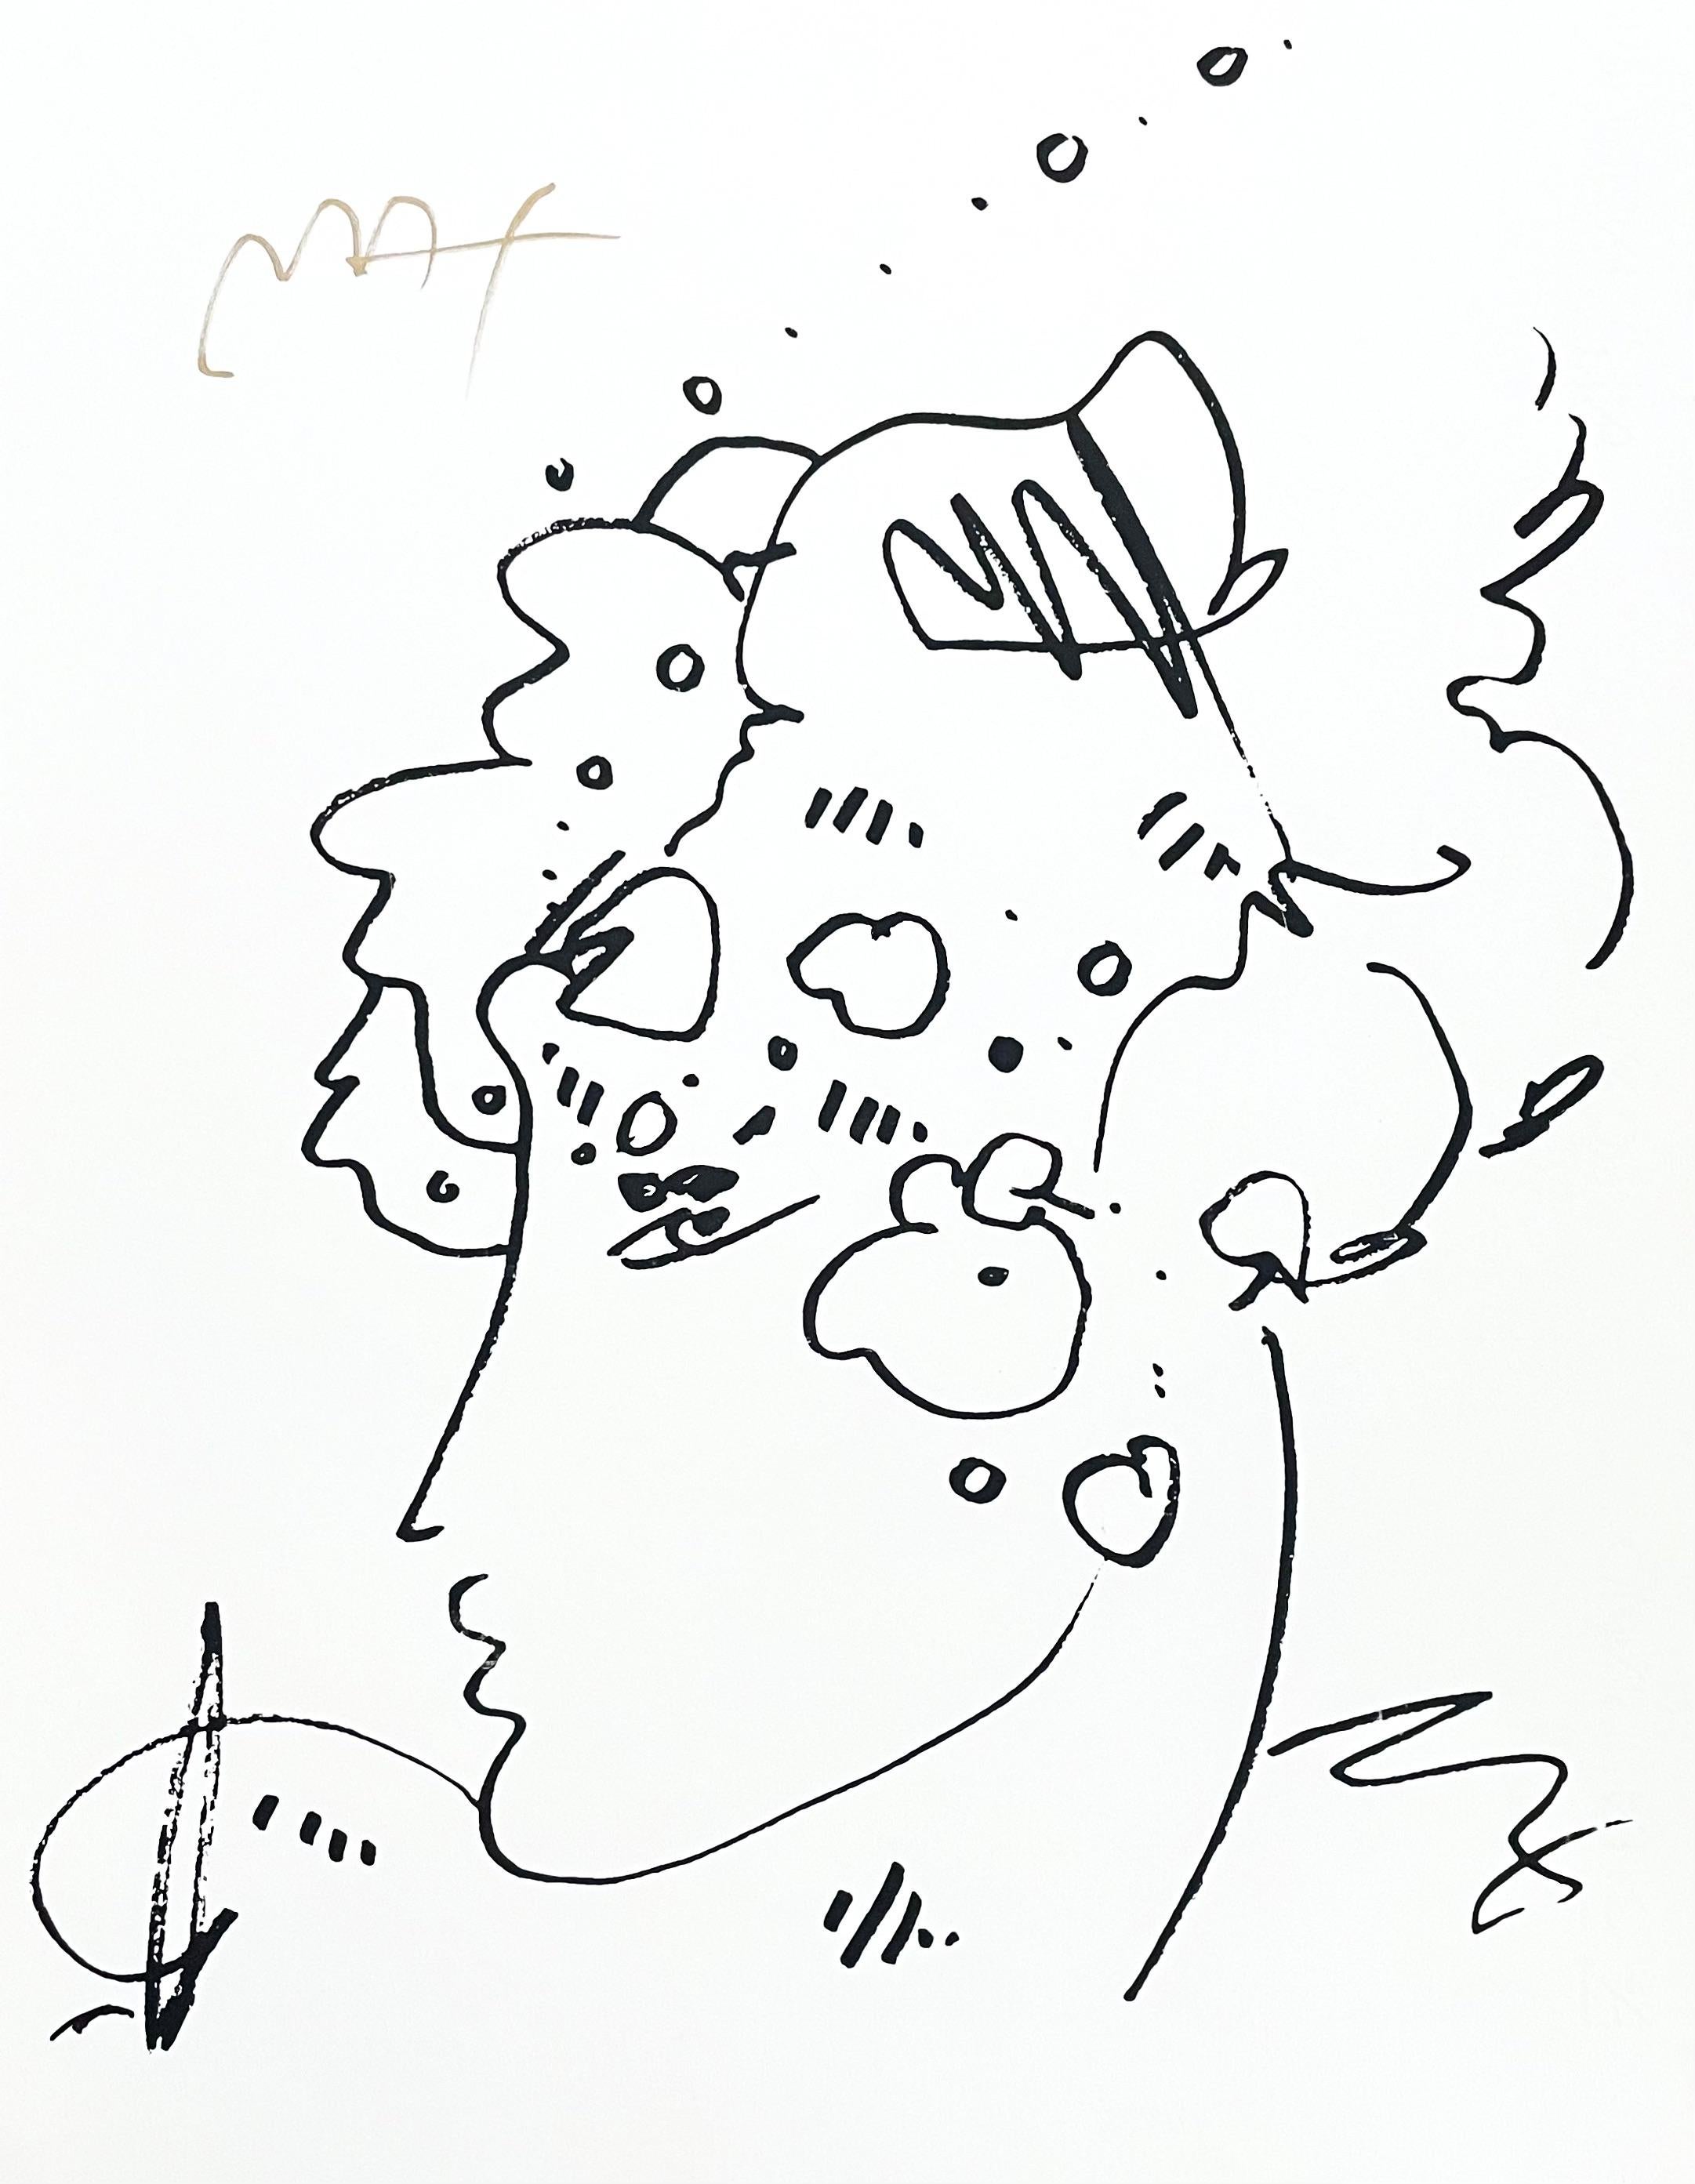 Artist: Peter Max (1937)
Title: Lady Profile
Year: circa 1998
Medium: Silkscreen on archival paper
Size: 19.75 x 15.25 inches
Condition: Excellent
Inscription: Signed in permanent marker

PETER MAX (1937- ) Peter Max has achieved huge success and